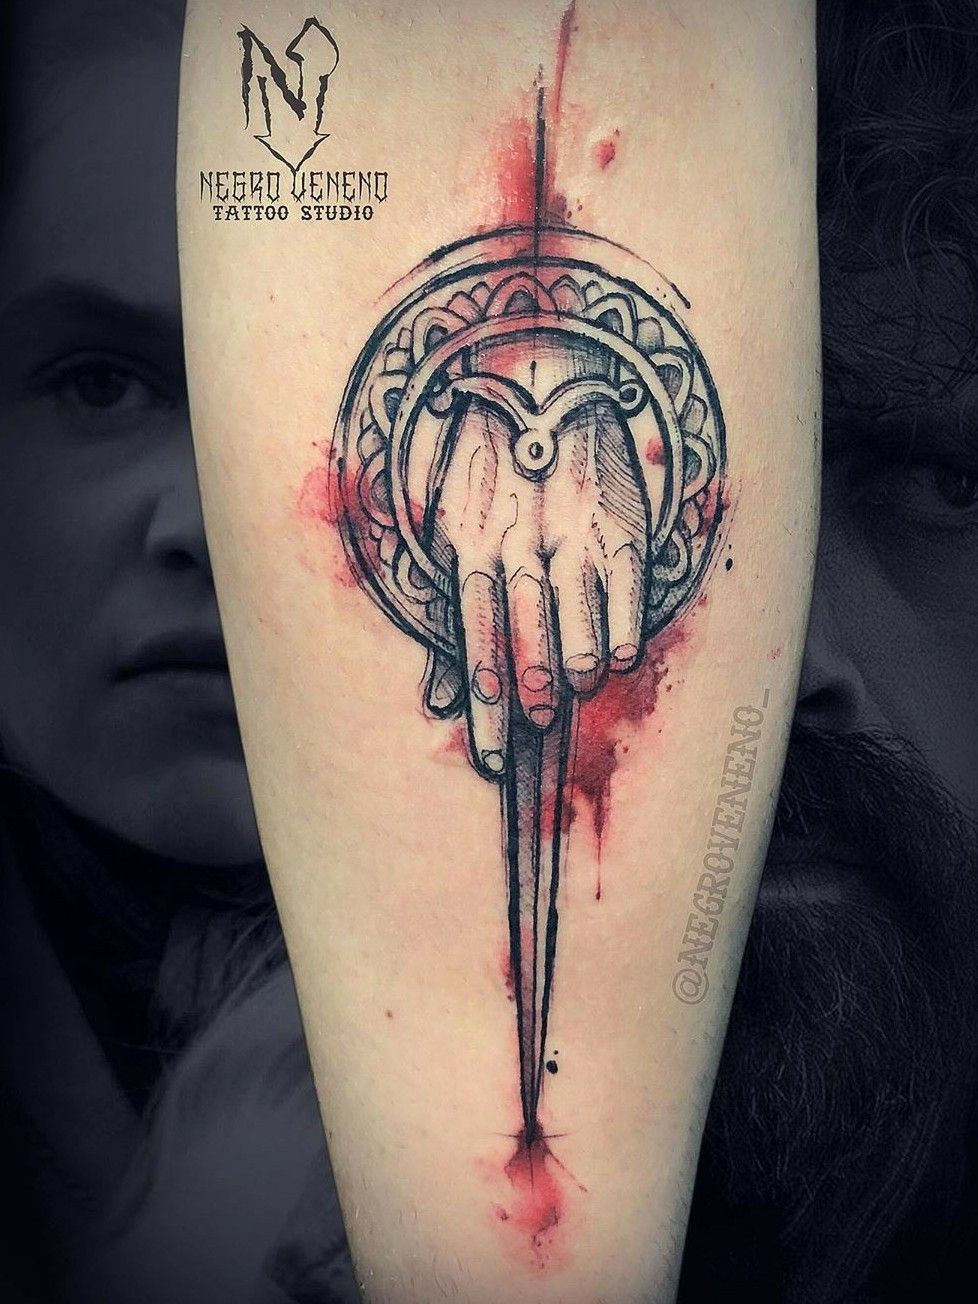 Tattoo uploaded by Pablo Canovas  Game of trhones Hand of the King   Tattoodo